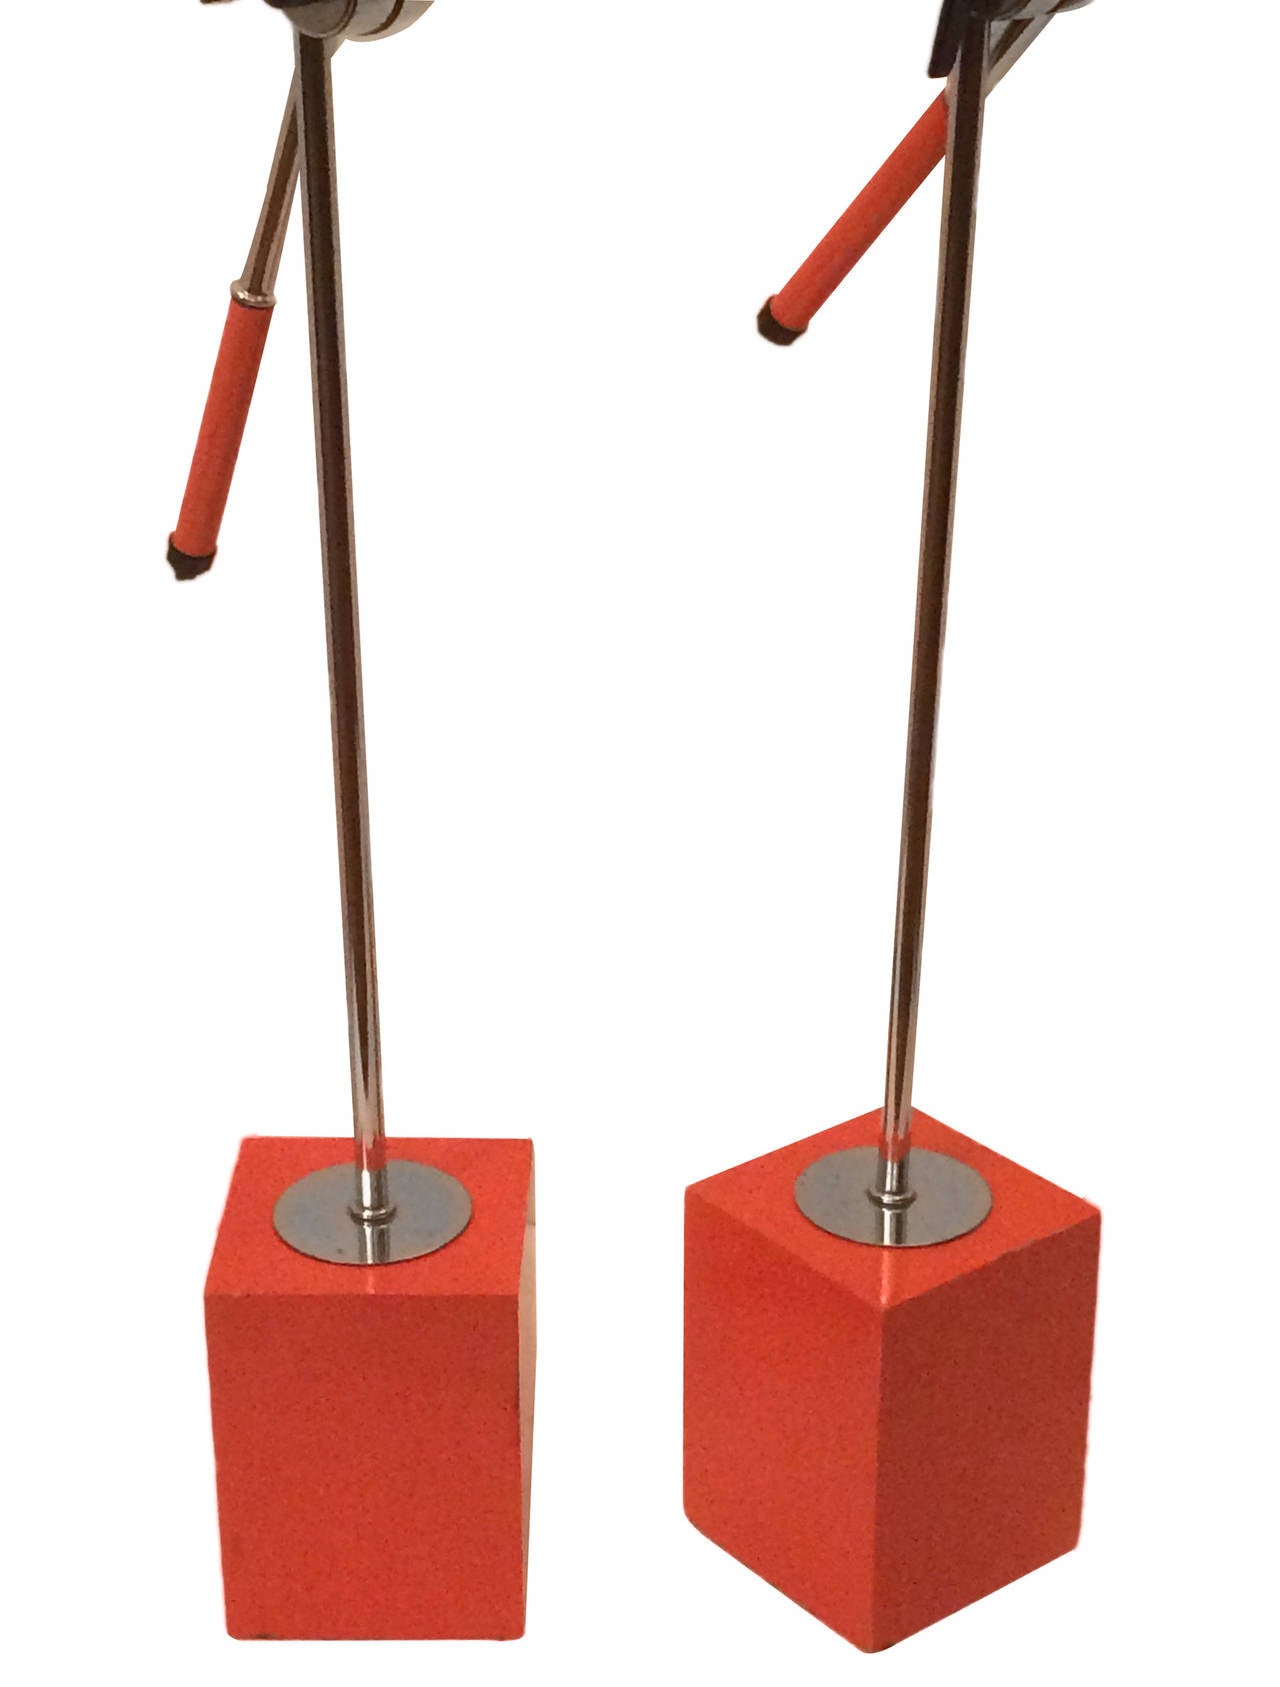 Pair of circa 1960's Italian moderne style lamps, painted orange and nickel plated.

Measurements:
Height: 31